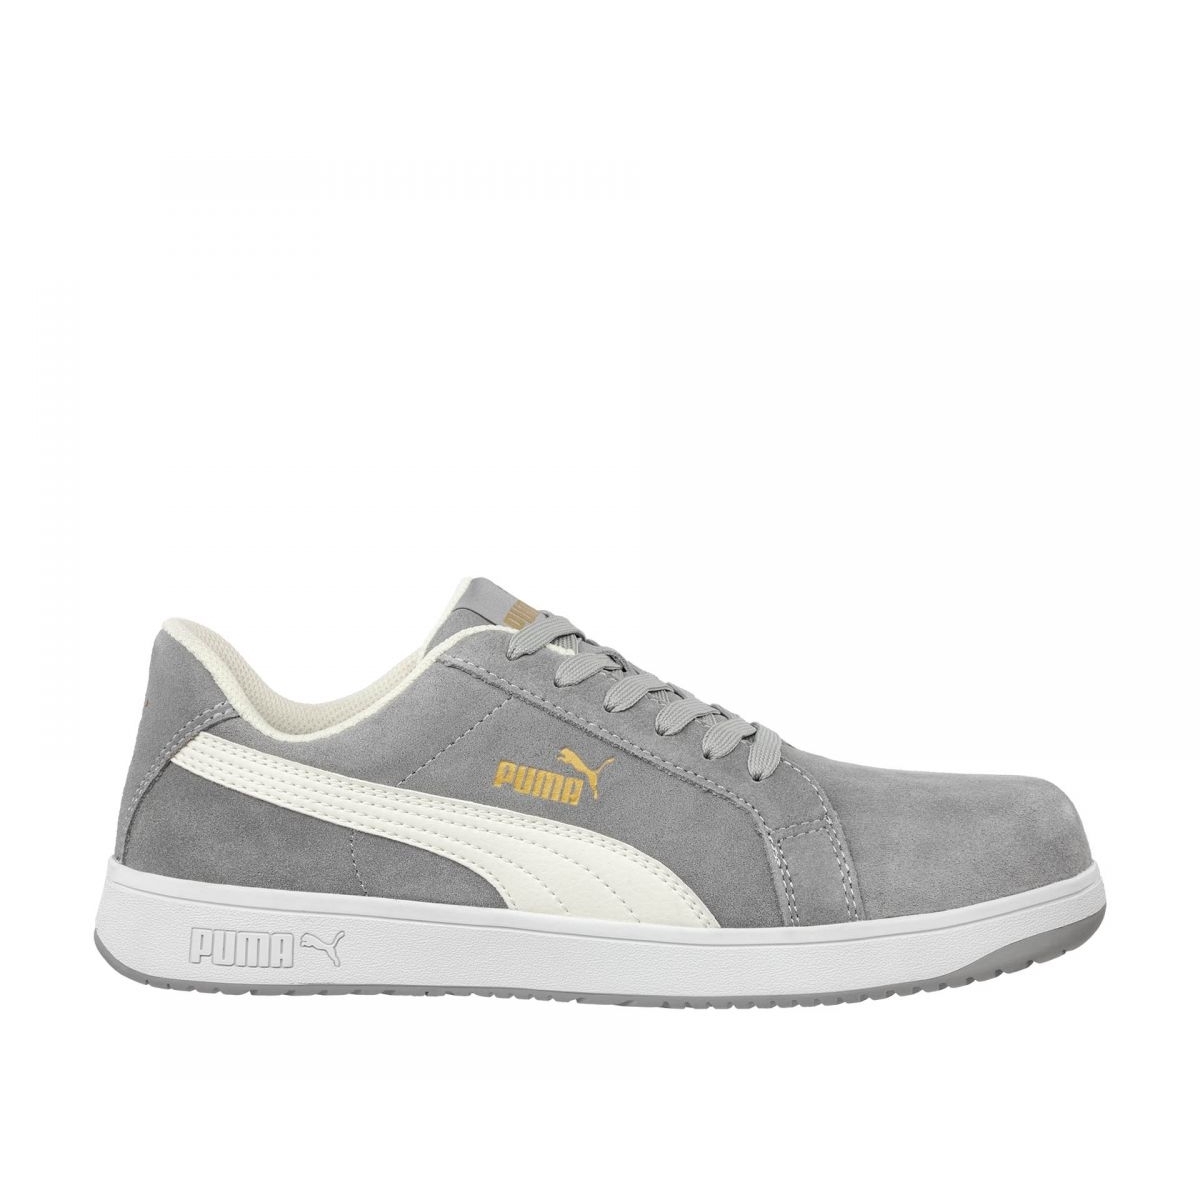 PUMA Safety Women's Iconic Low Composite Toe SD Work Shoes Grey Suede - 640125 Grey - Grey, 7.5